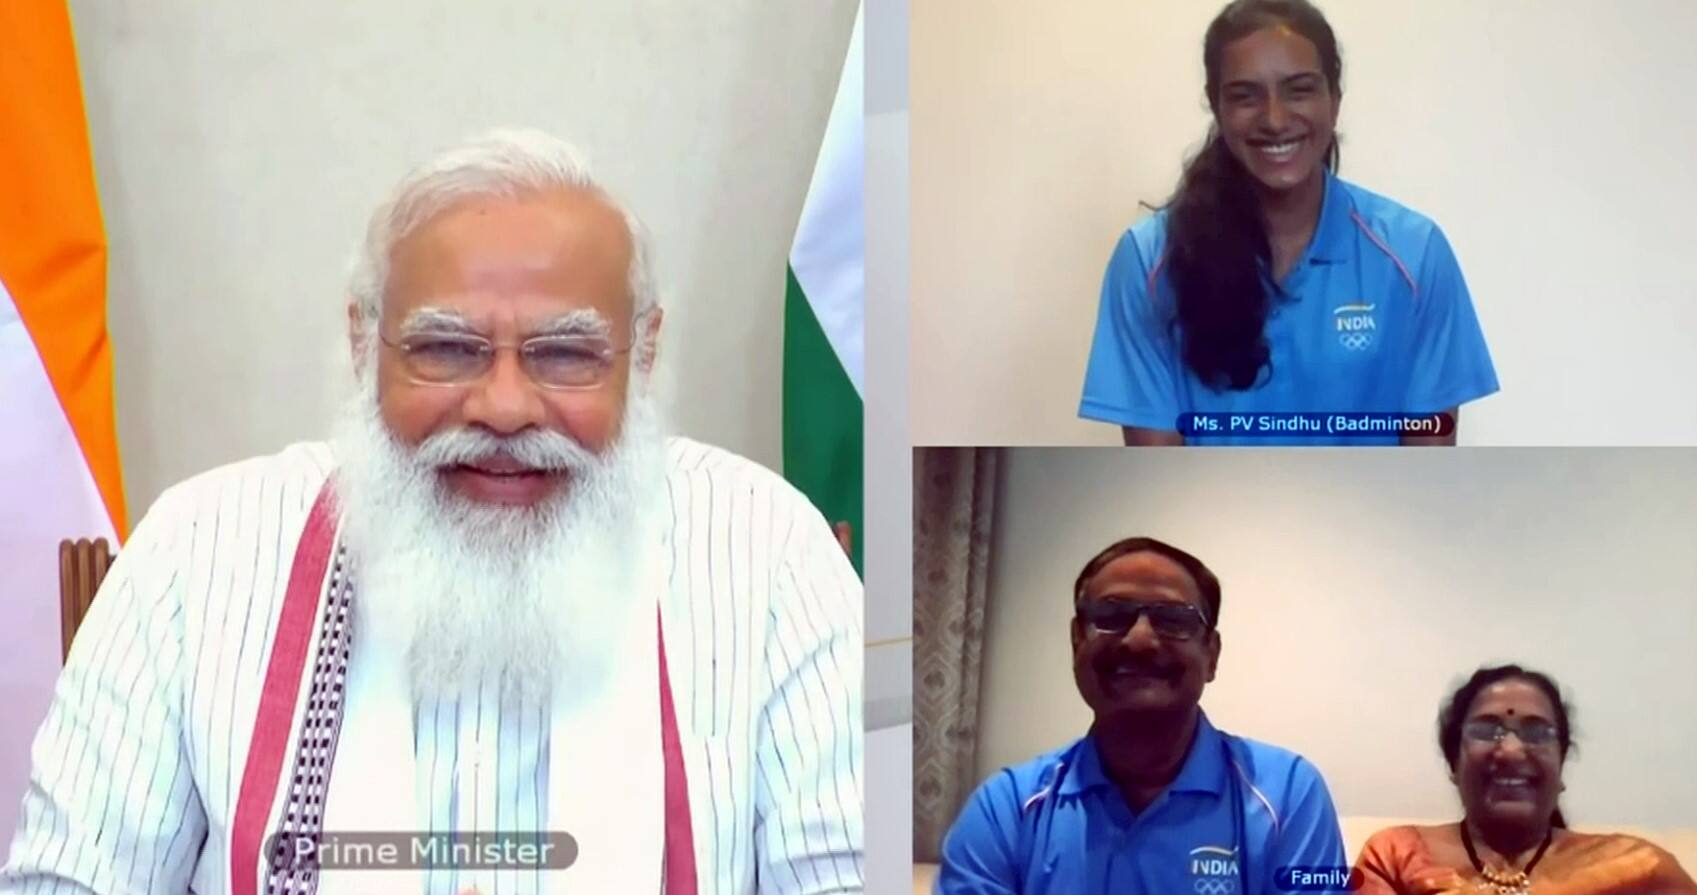 PM Modi promised to have ice cream with PV Sindhu after she returns from the Summer Games